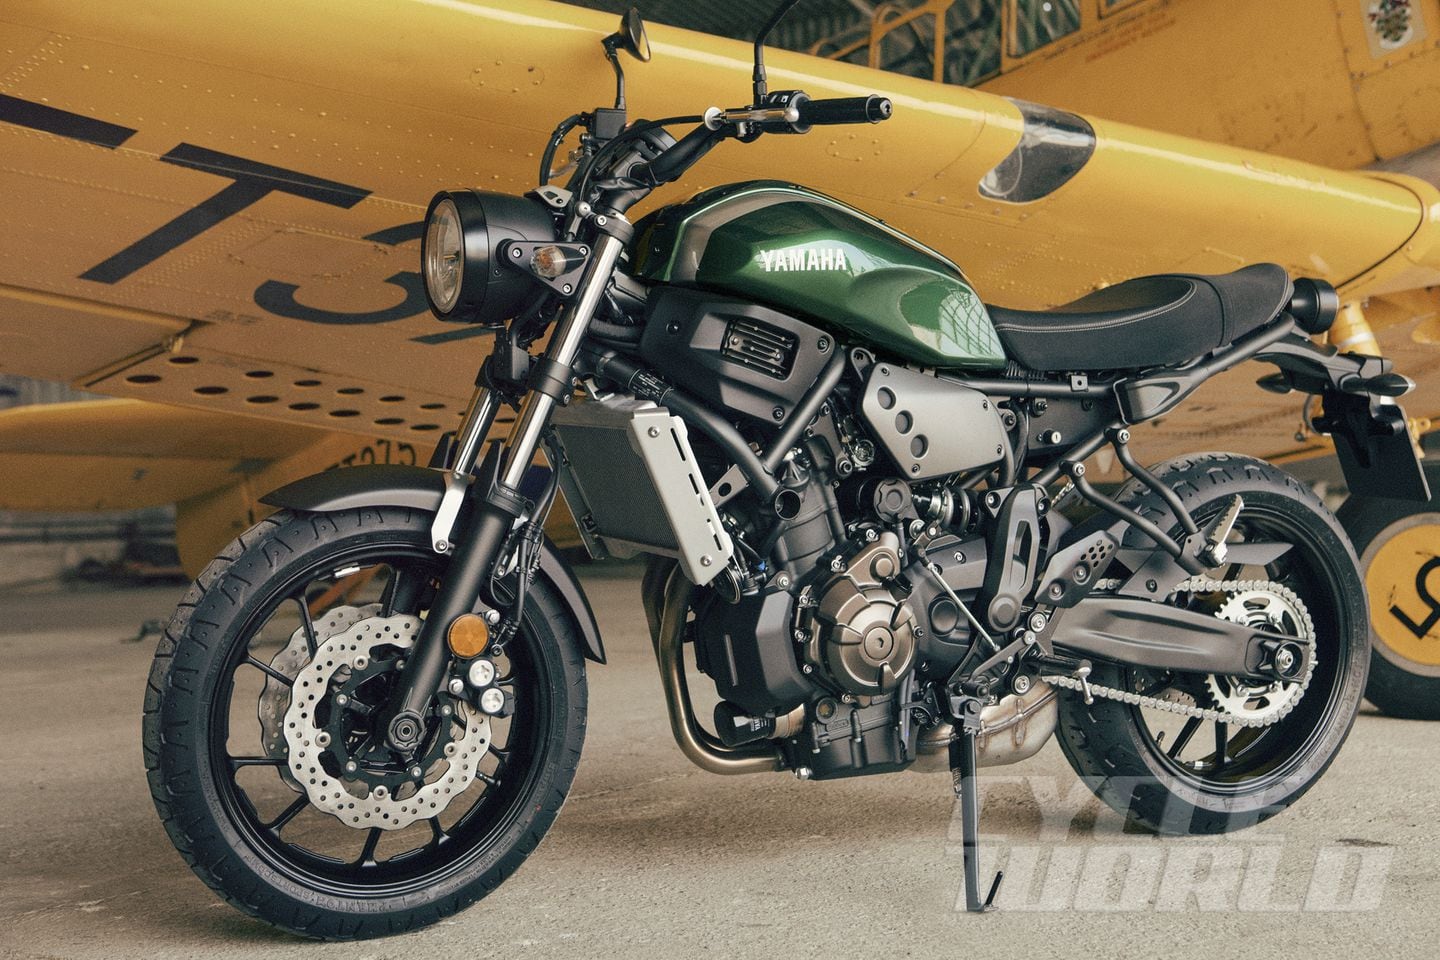 Yamaha FIRST LOOK Naked Motorcycle Review- Photos | Cycle World